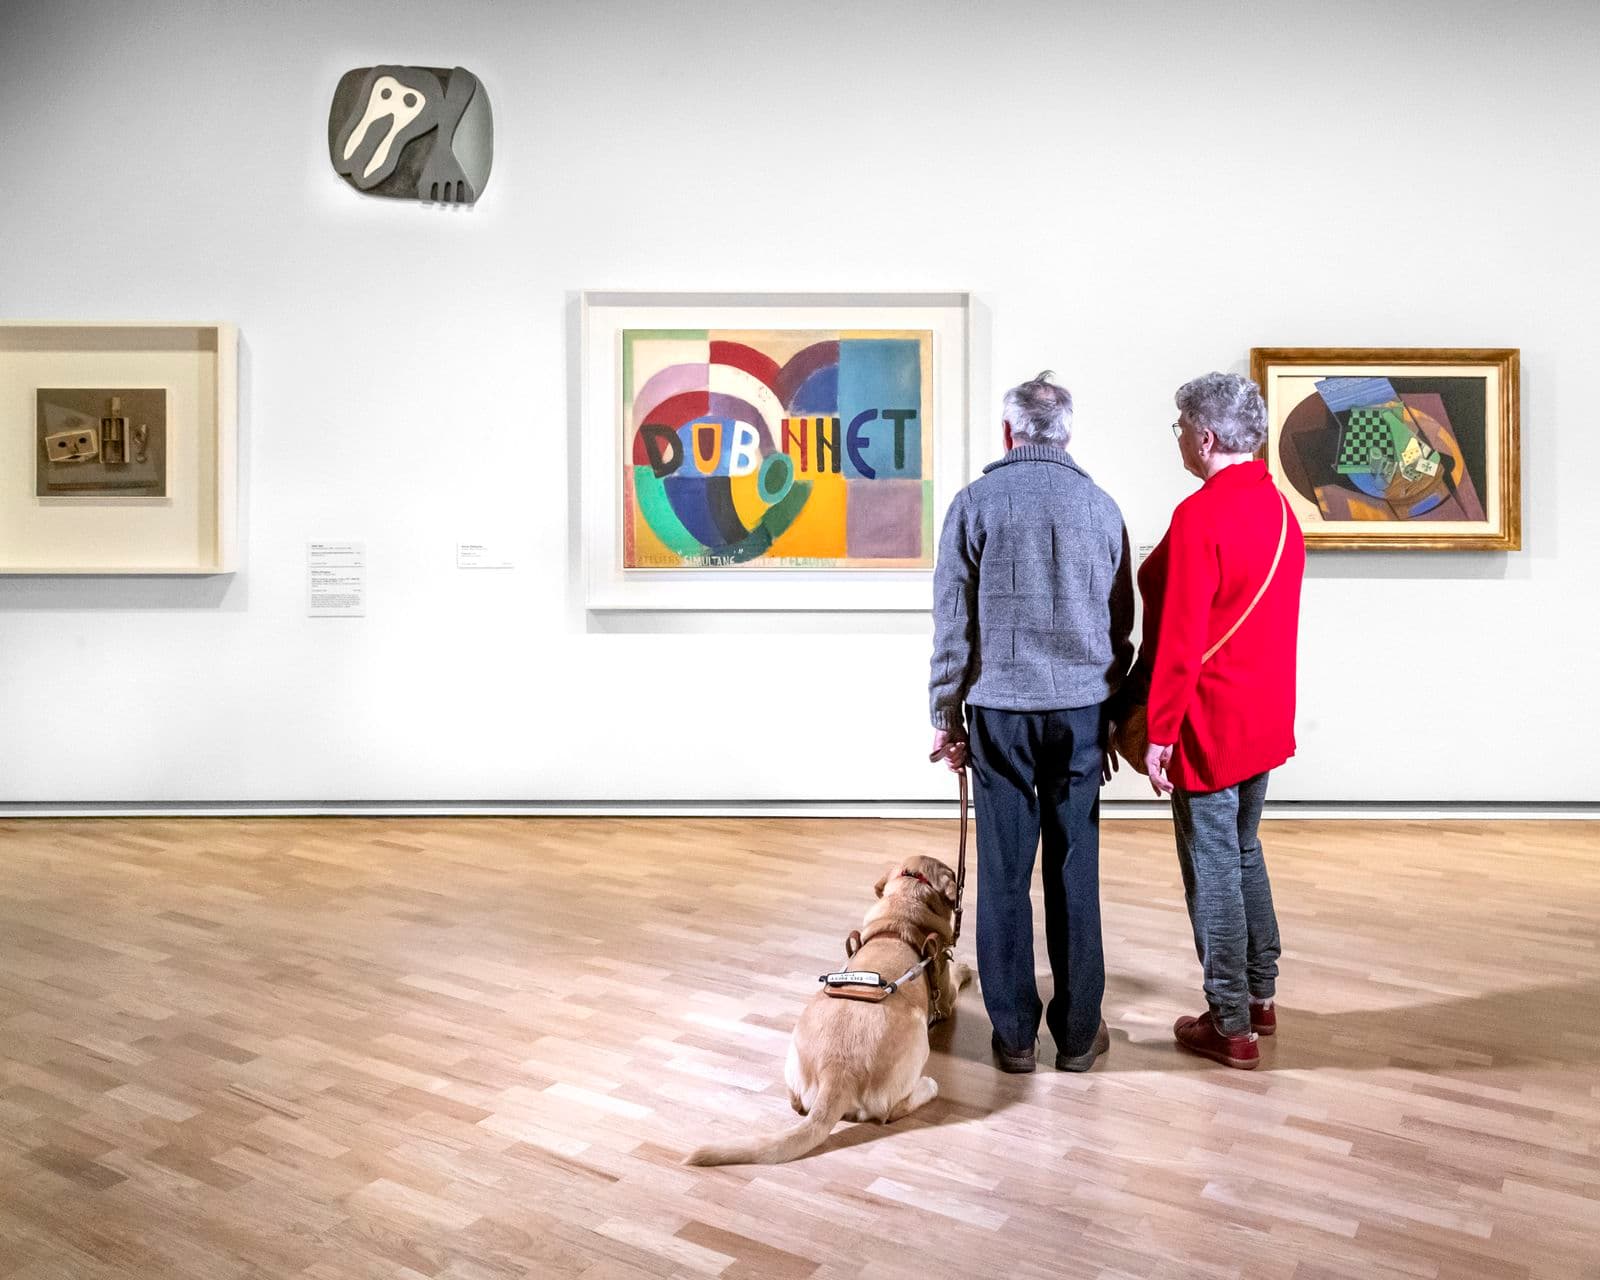 Photograph of two visitors facing artworks with companion dog by side